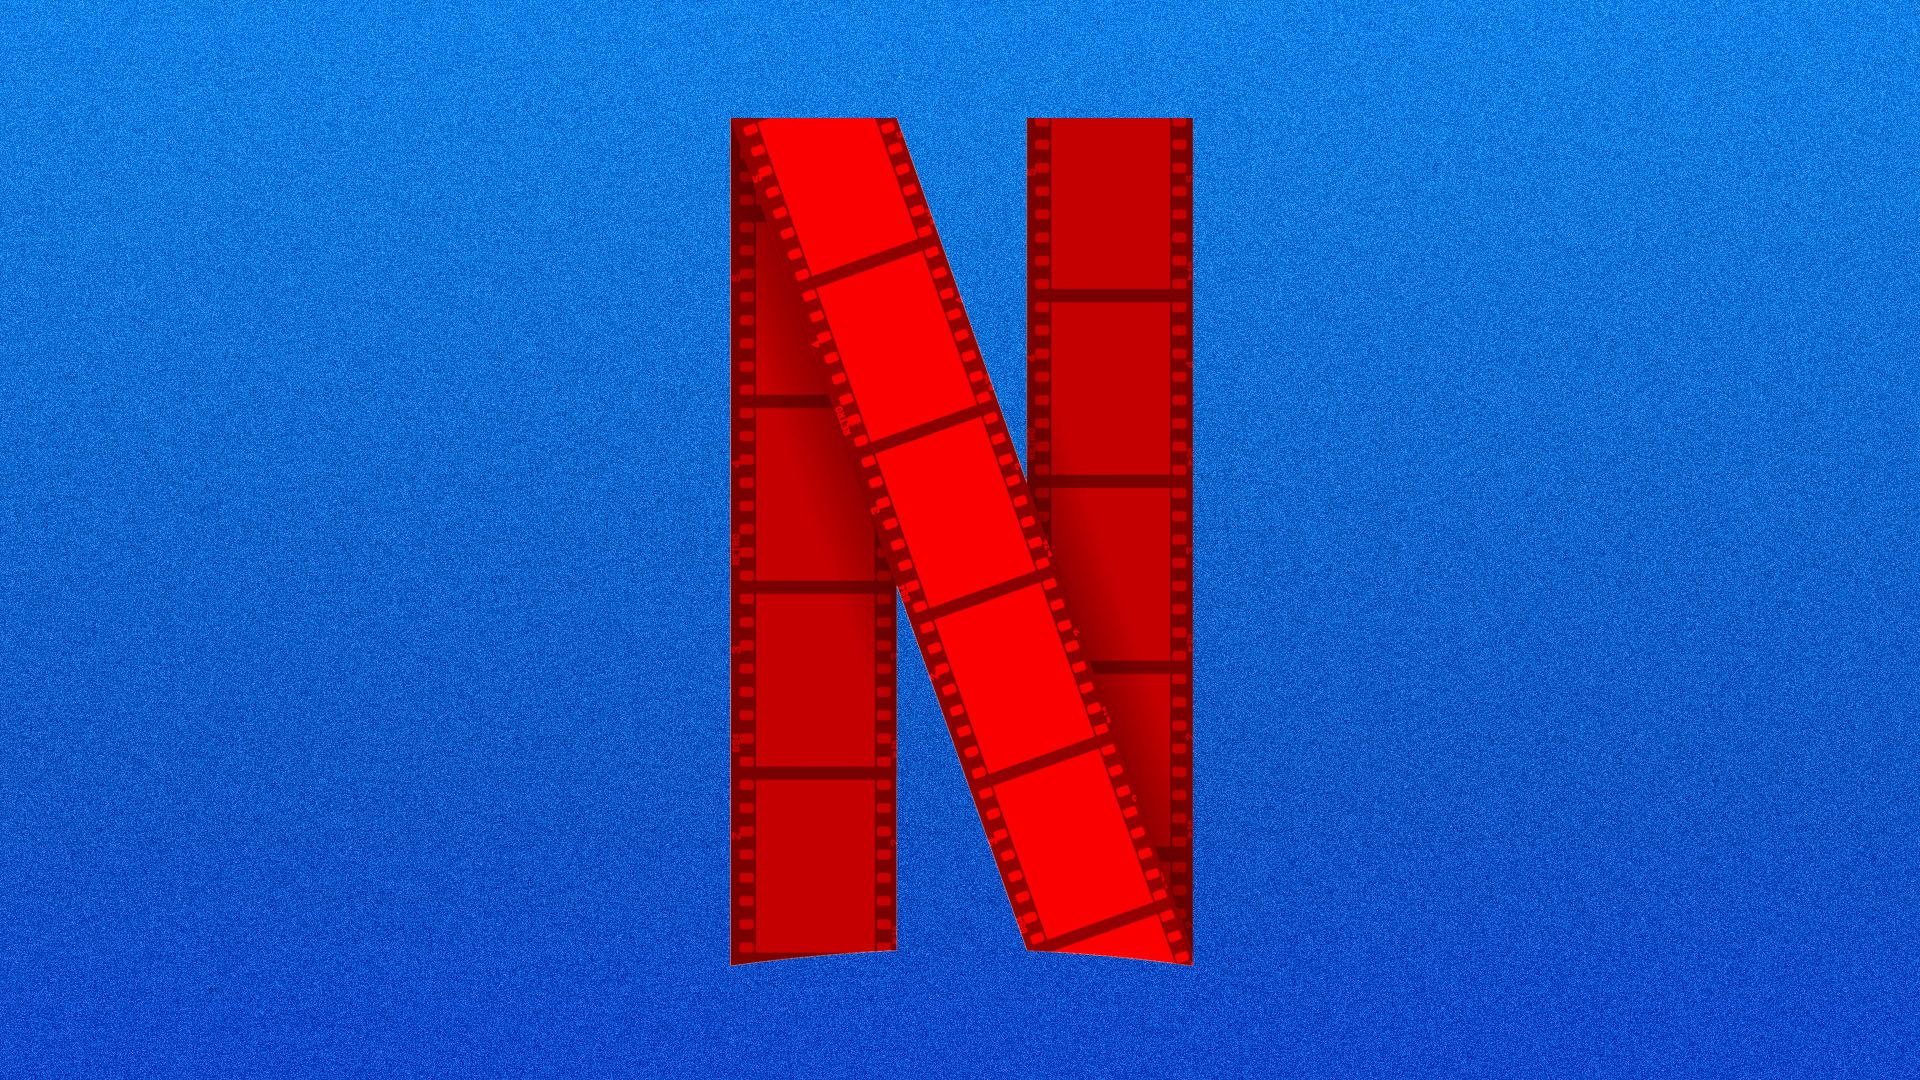 This illustration shows the Netflix logo made out of movie reel